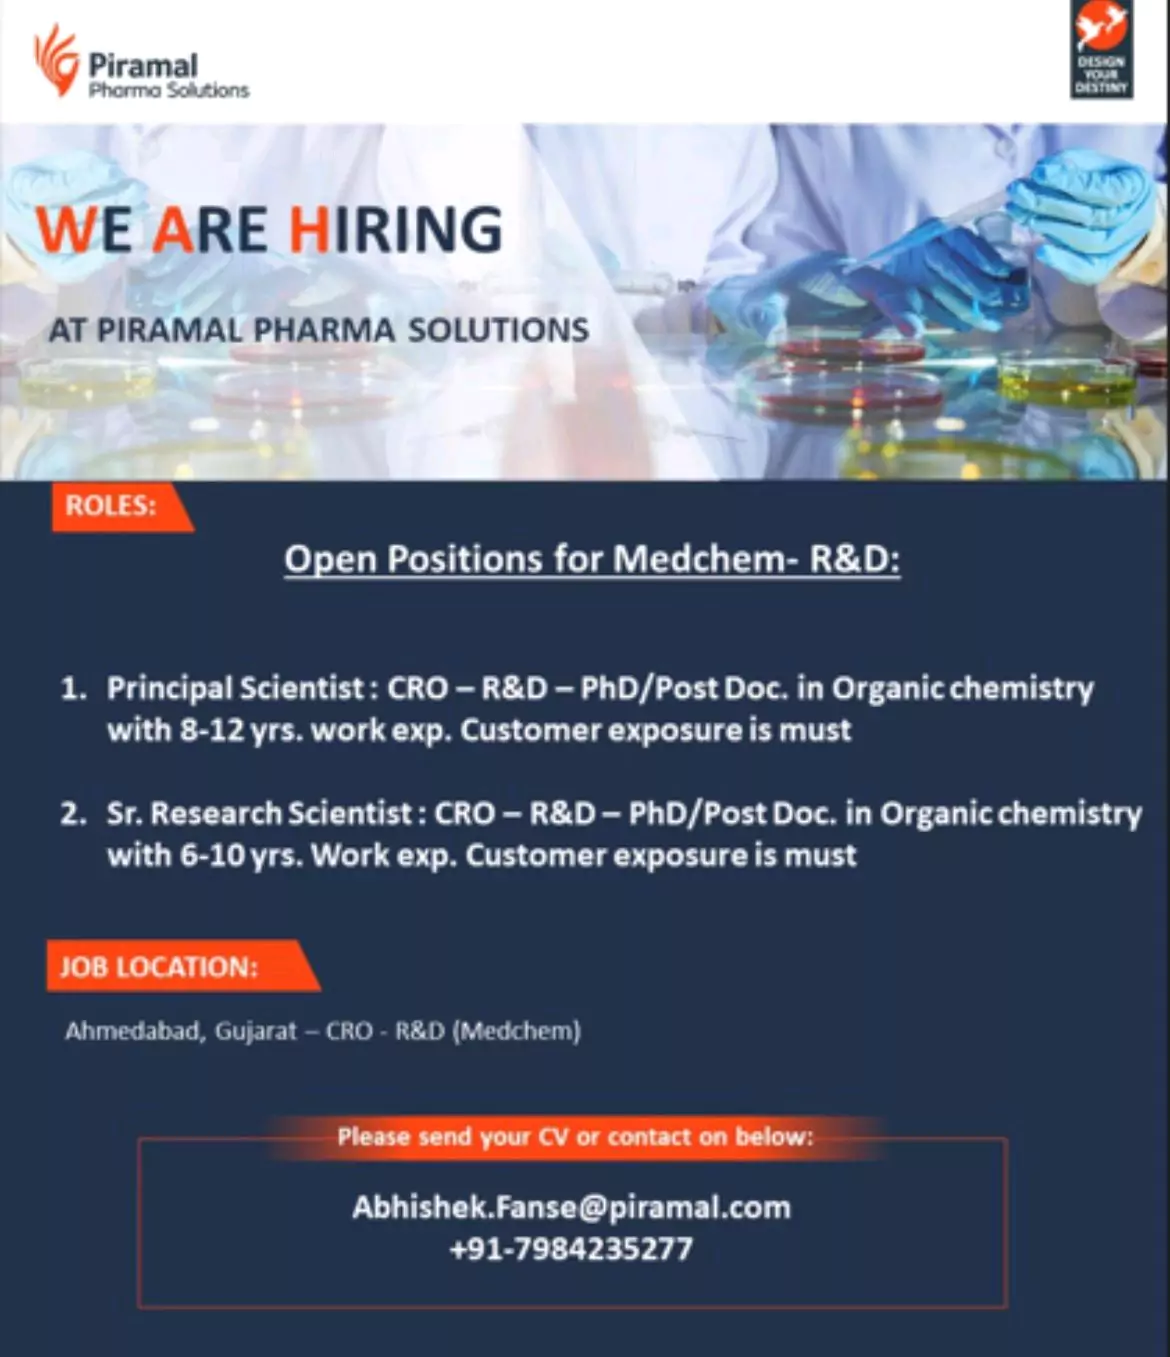 Piramal pharma solutions Open Positions for Medchem- R&D Research Scientists